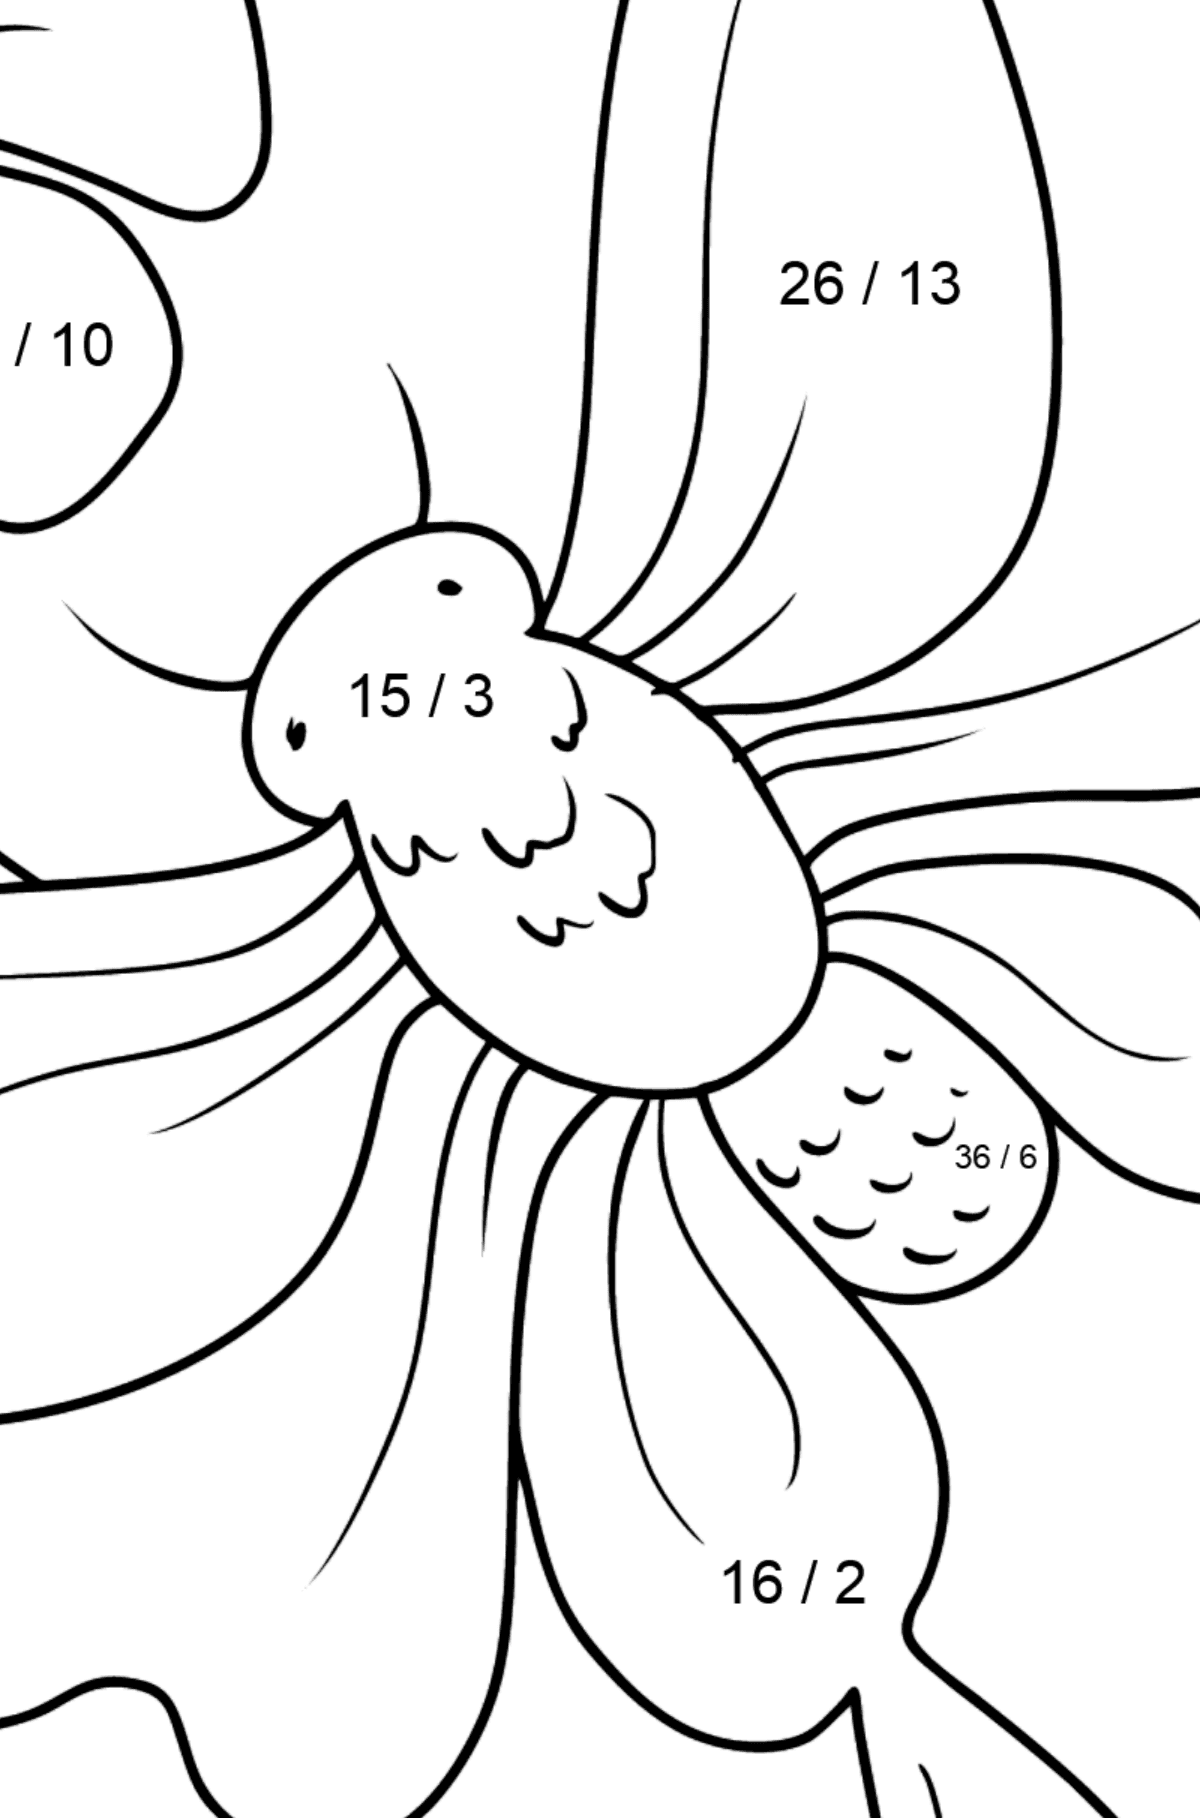 Butterfly on a Flower coloring page - Math Coloring - Division for Kids